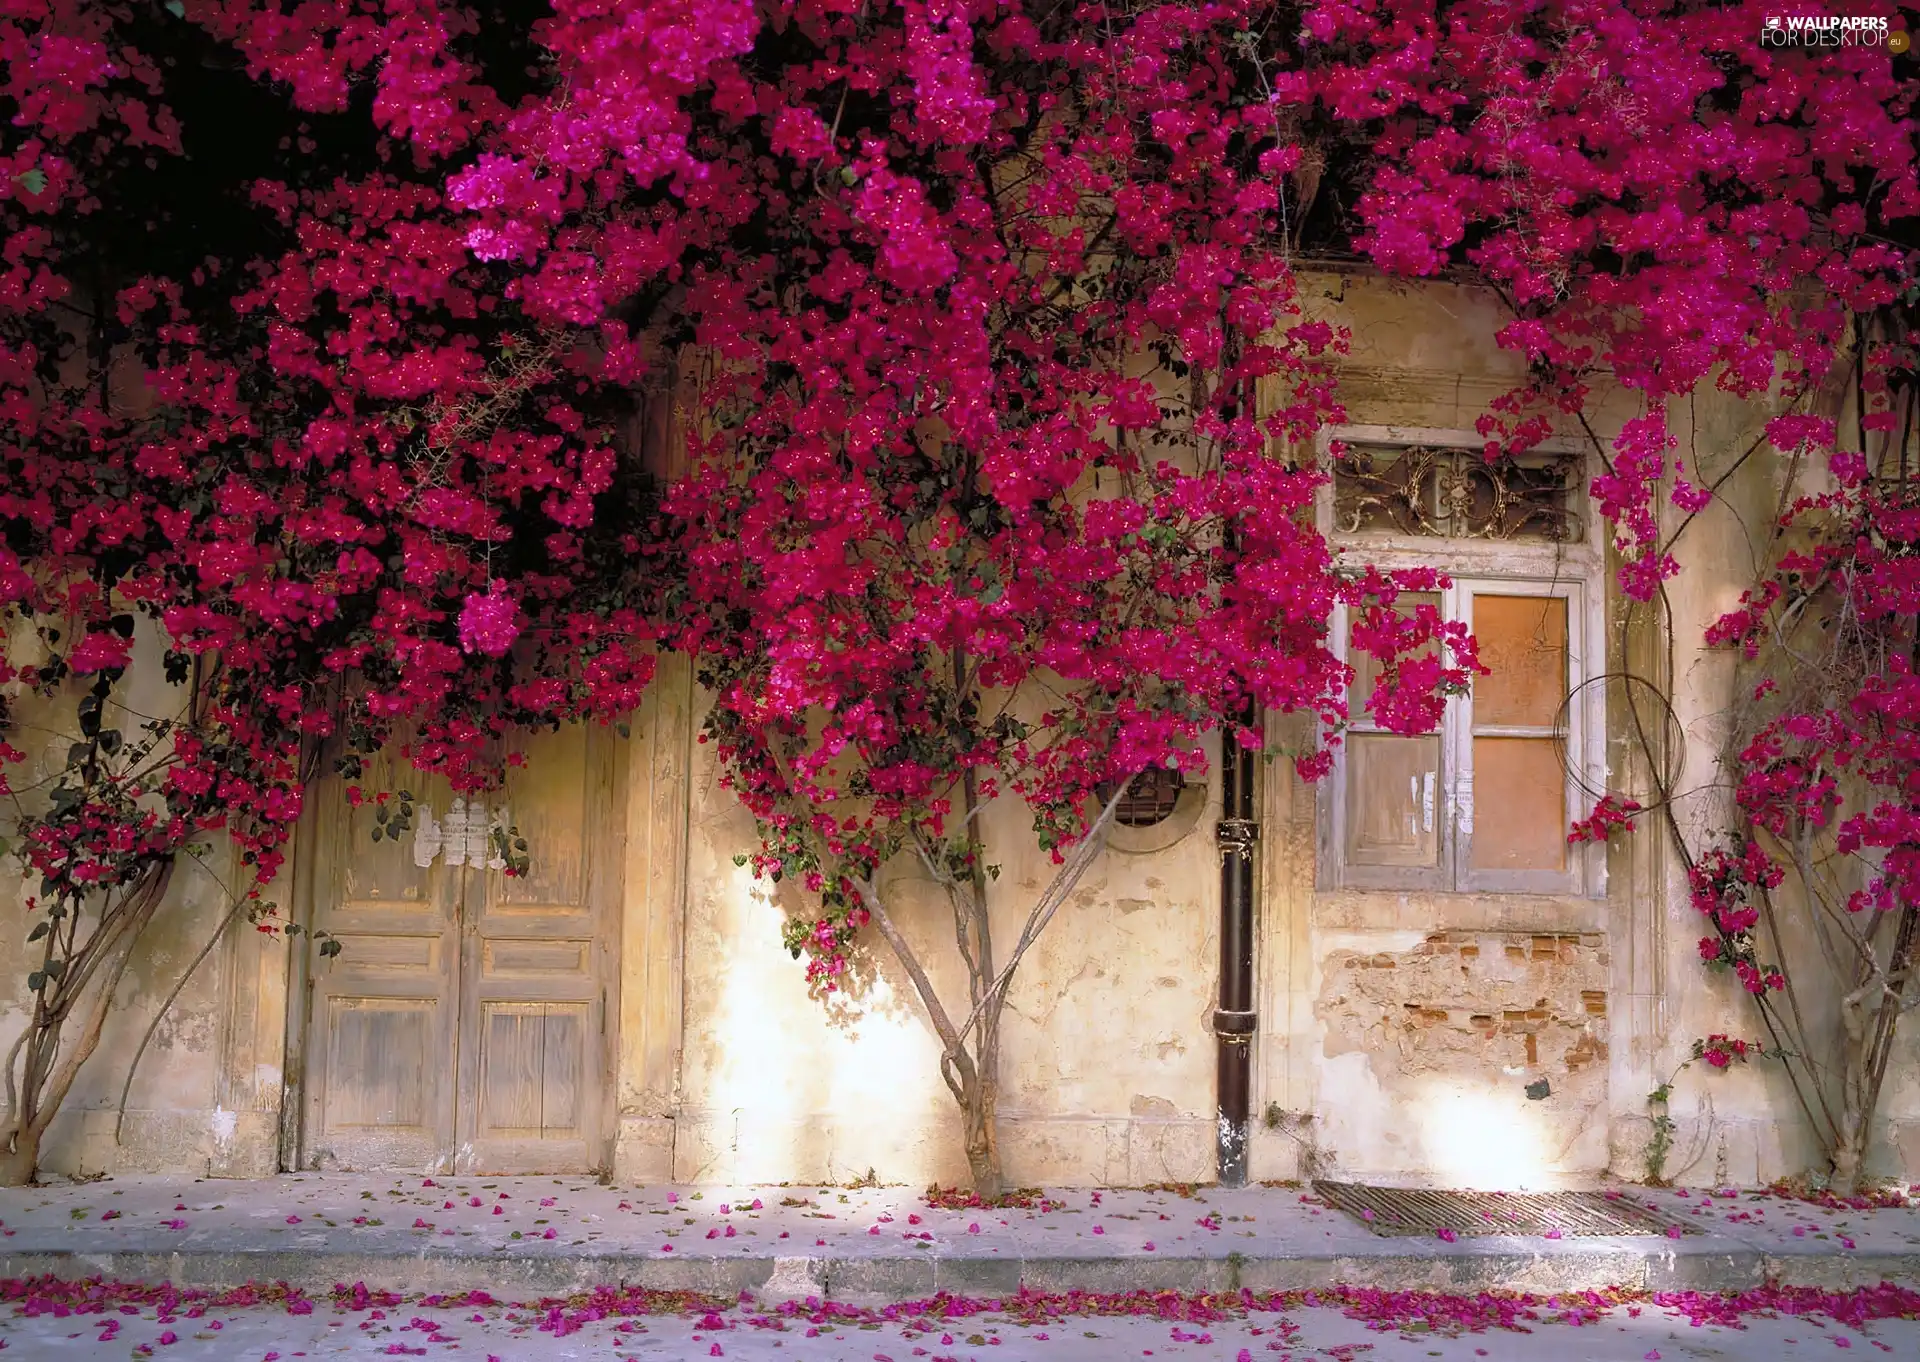 wall, Covered, flowers, house